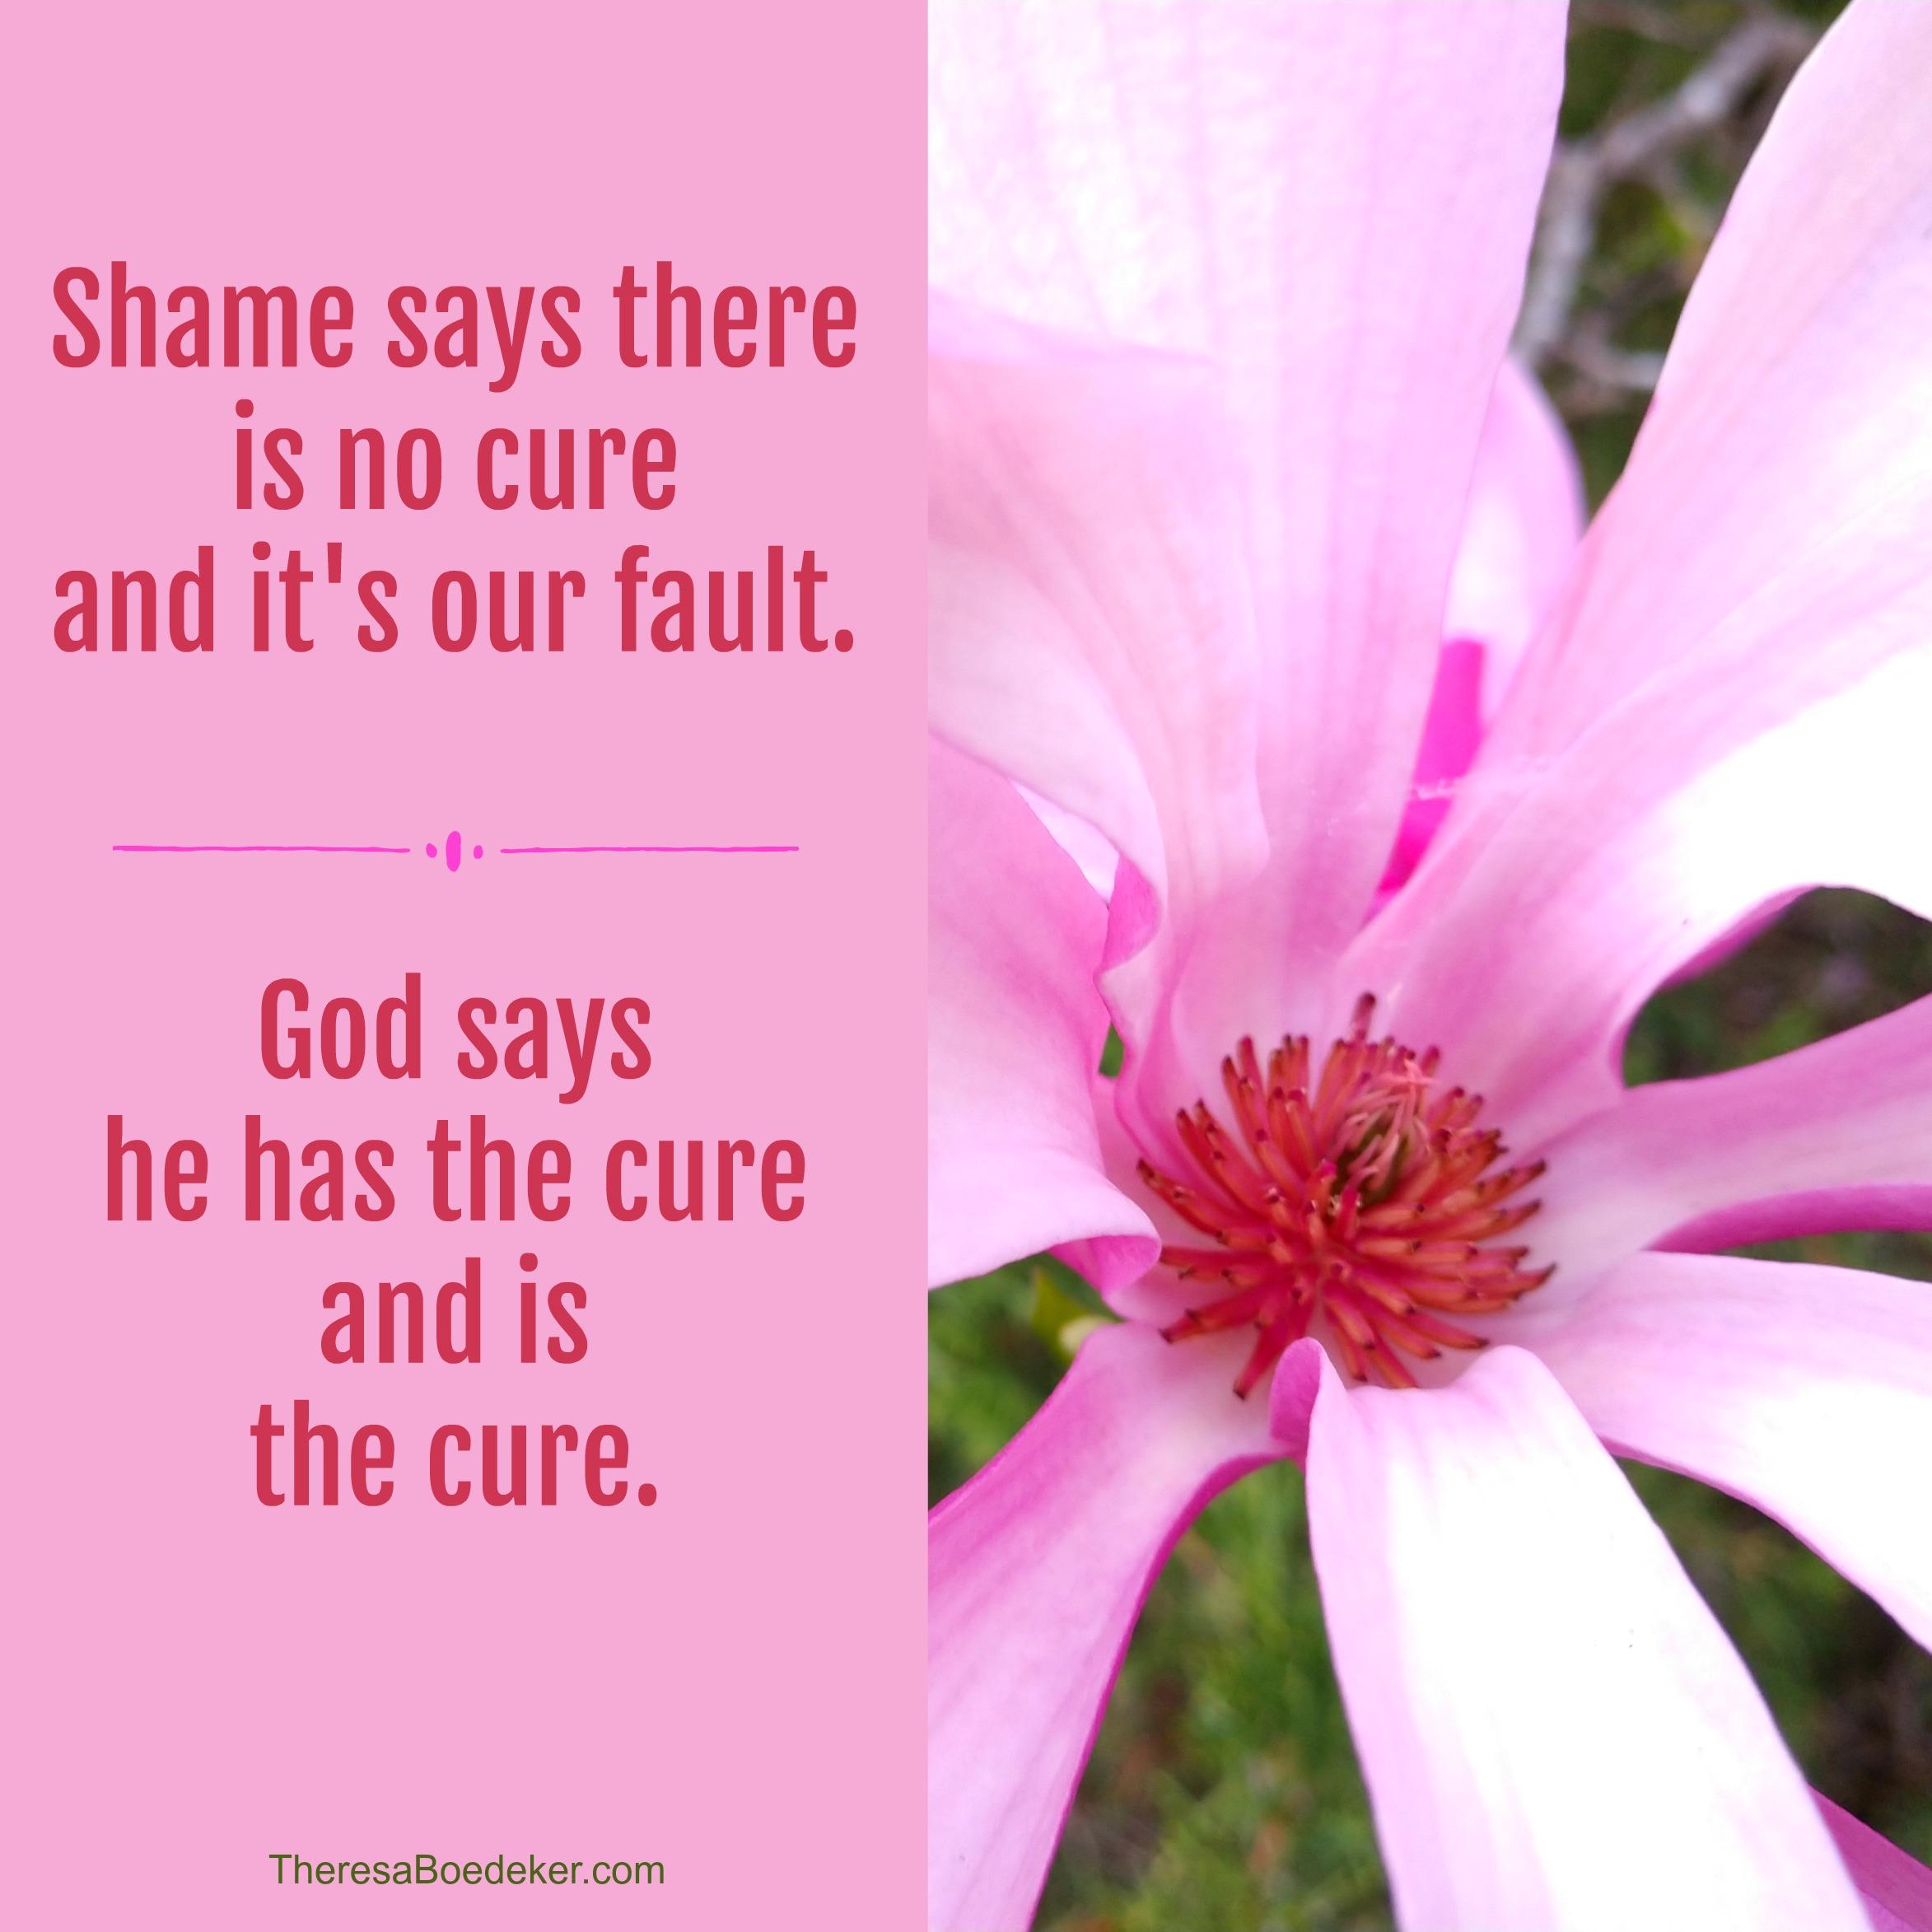 Experiencing shame is part of being human. Learn to recognize it, heal from it, and walk in freedom.